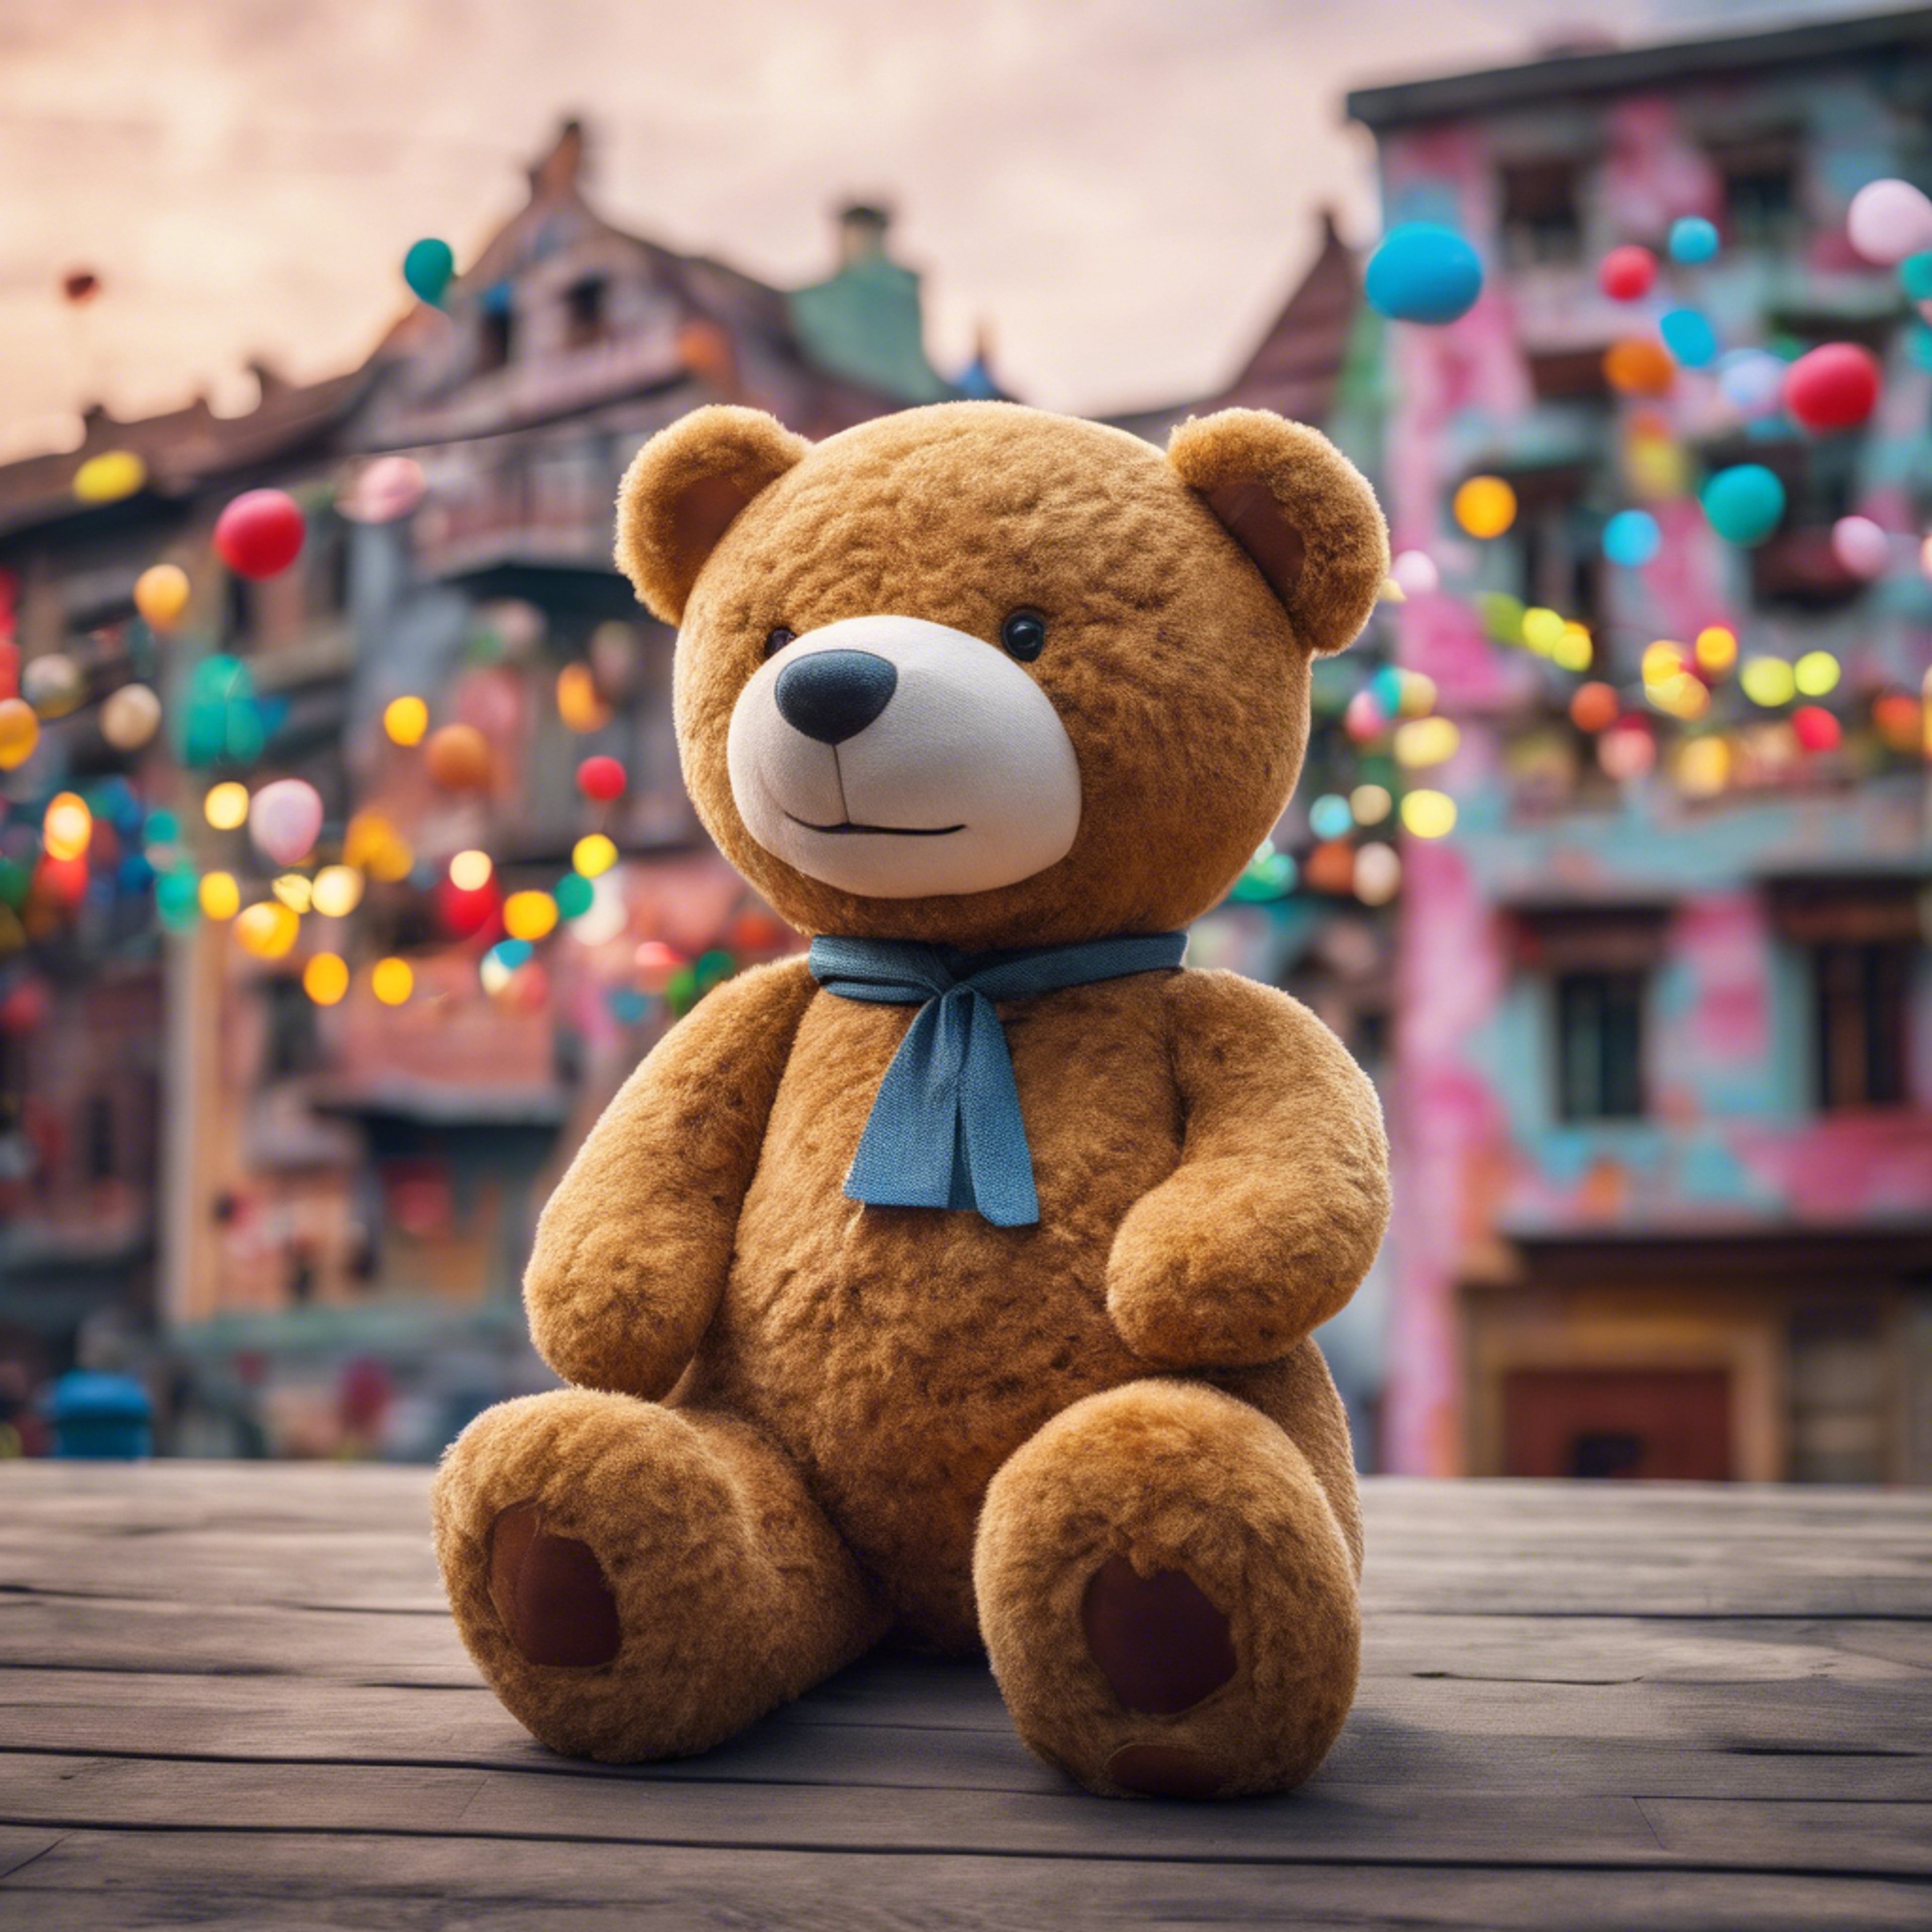 A giant teddy bear watching over a playful and colorful dream town. ورق الجدران[2720b550e885450daa82]